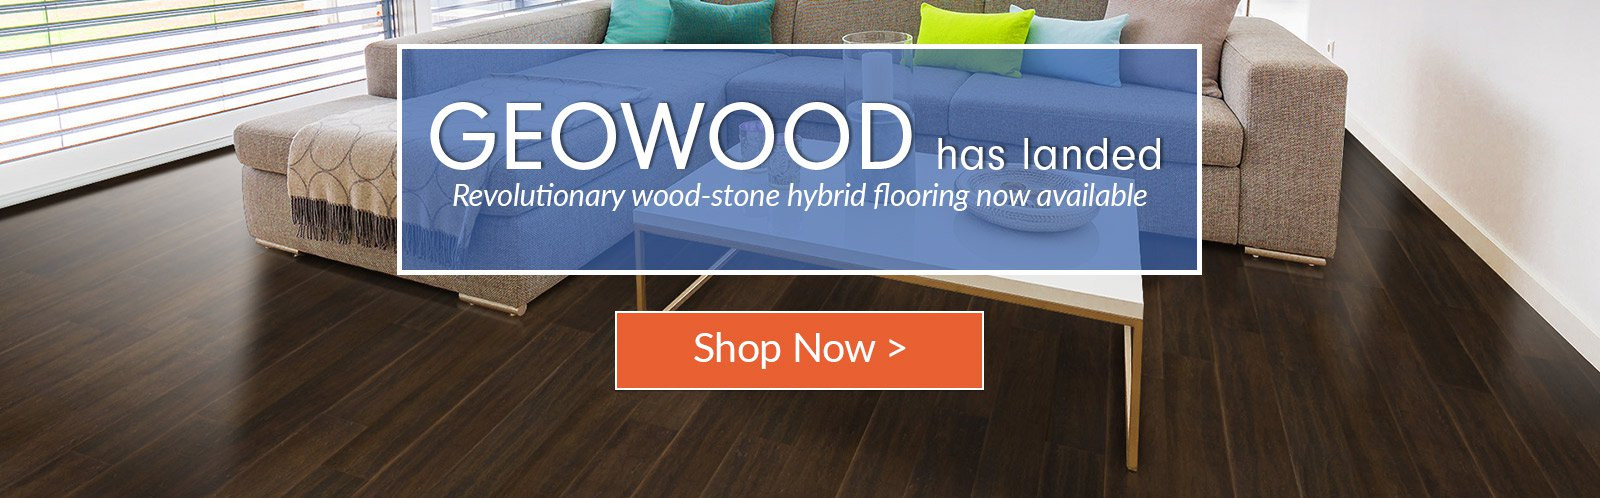 30 attractive Hardwood Flooring Retailers 2024 free download hardwood flooring retailers of green building construction materials and home decor cali bamboo with geowood launch homepage slider